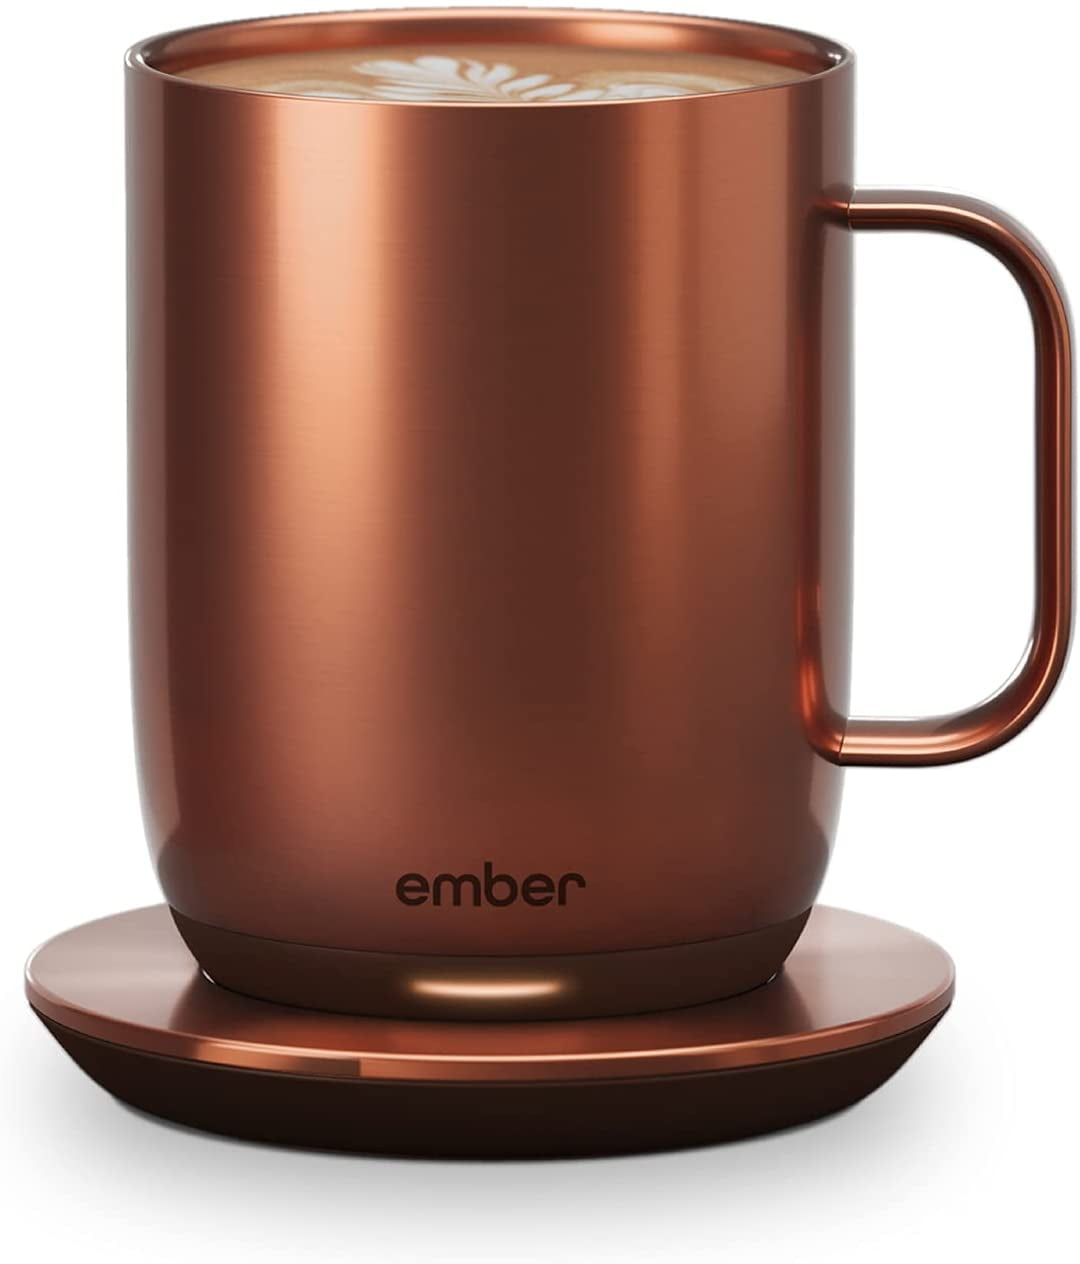 Ember Temperature Control Smart Mug 2, 10 oz, Grey, 80 min Battery Life |  App Controlled Heated Coffee Mug | Improved Design with Clear Splash-Proof